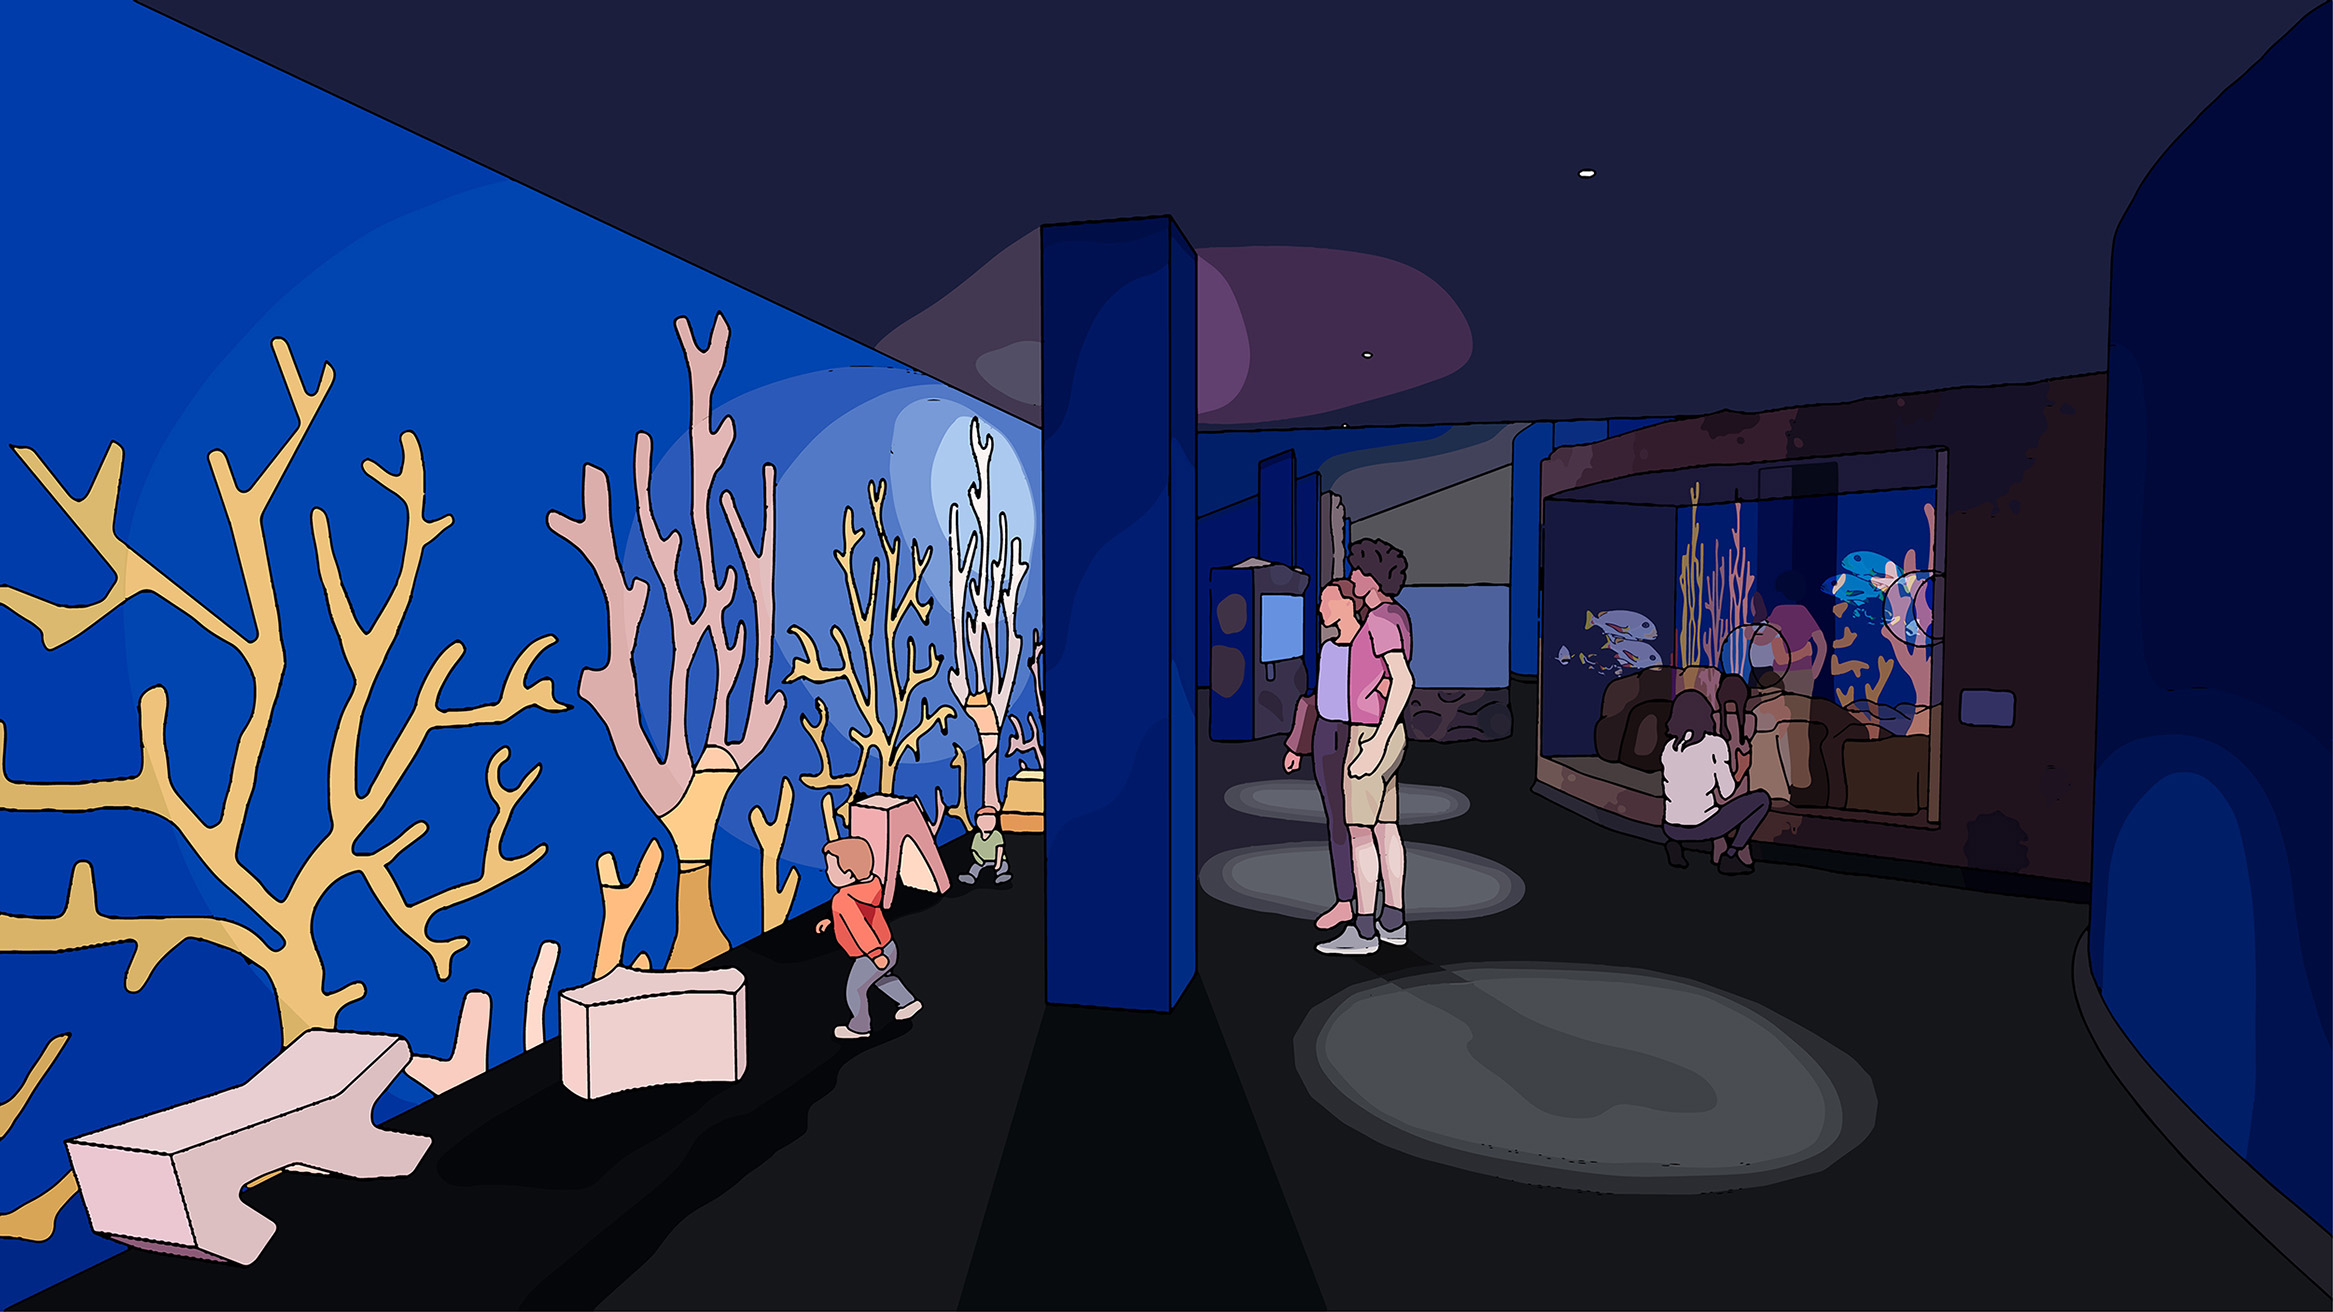 Render in illustrative style showing a soft play coral puzzle wall. There are also other tanks in frame. The whole space is dark blue.